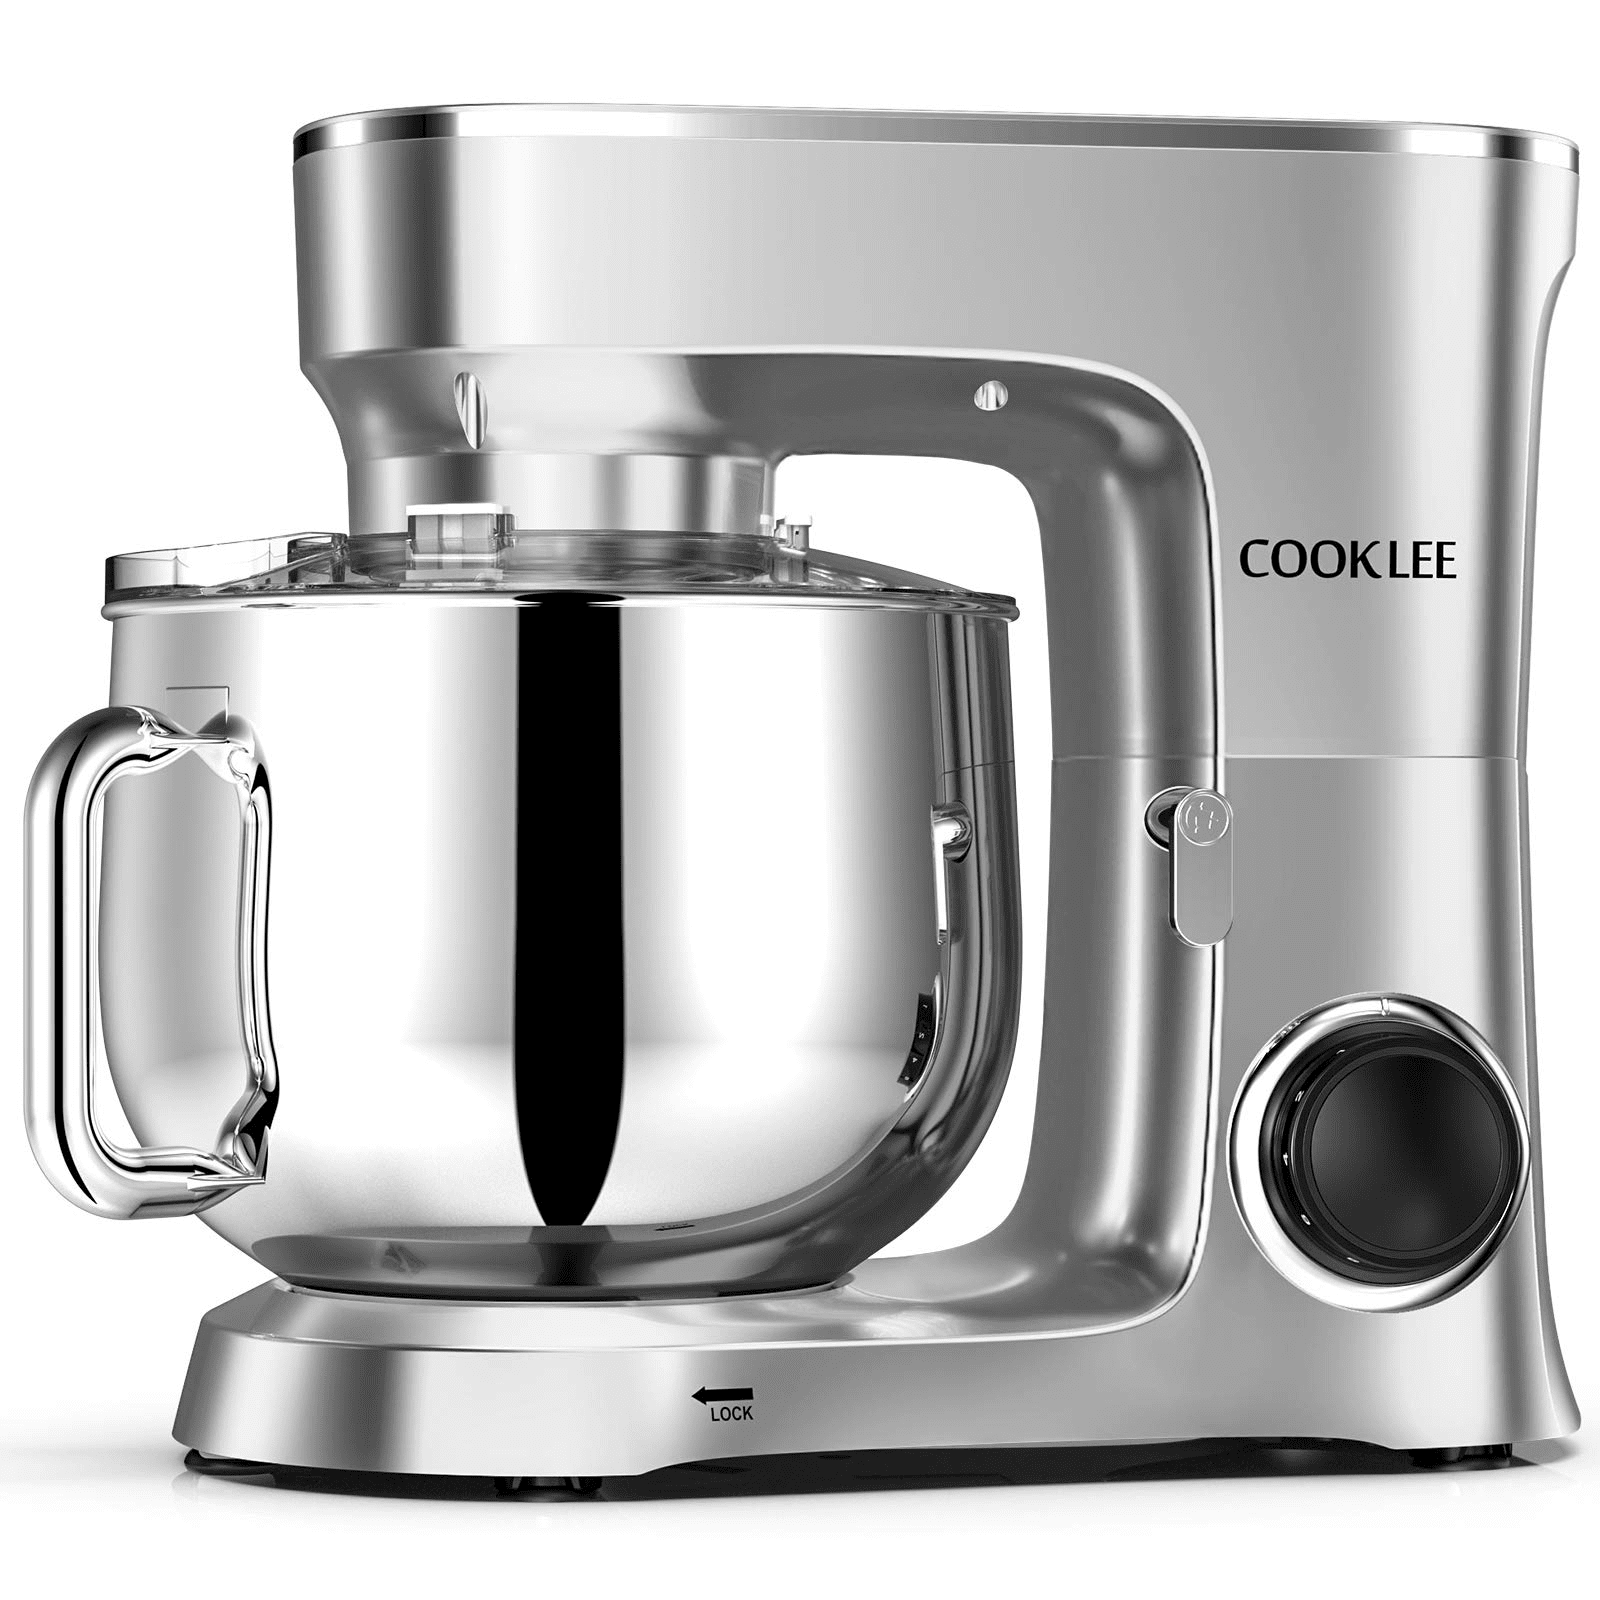 Dough Mixer with Ferment Function Mixing 550W Dough Machine with 5L Stainless Steel Bowl for Baking Black KICHOT Intelligent Timing & LCD Display Stand Mixer Cookie Cake